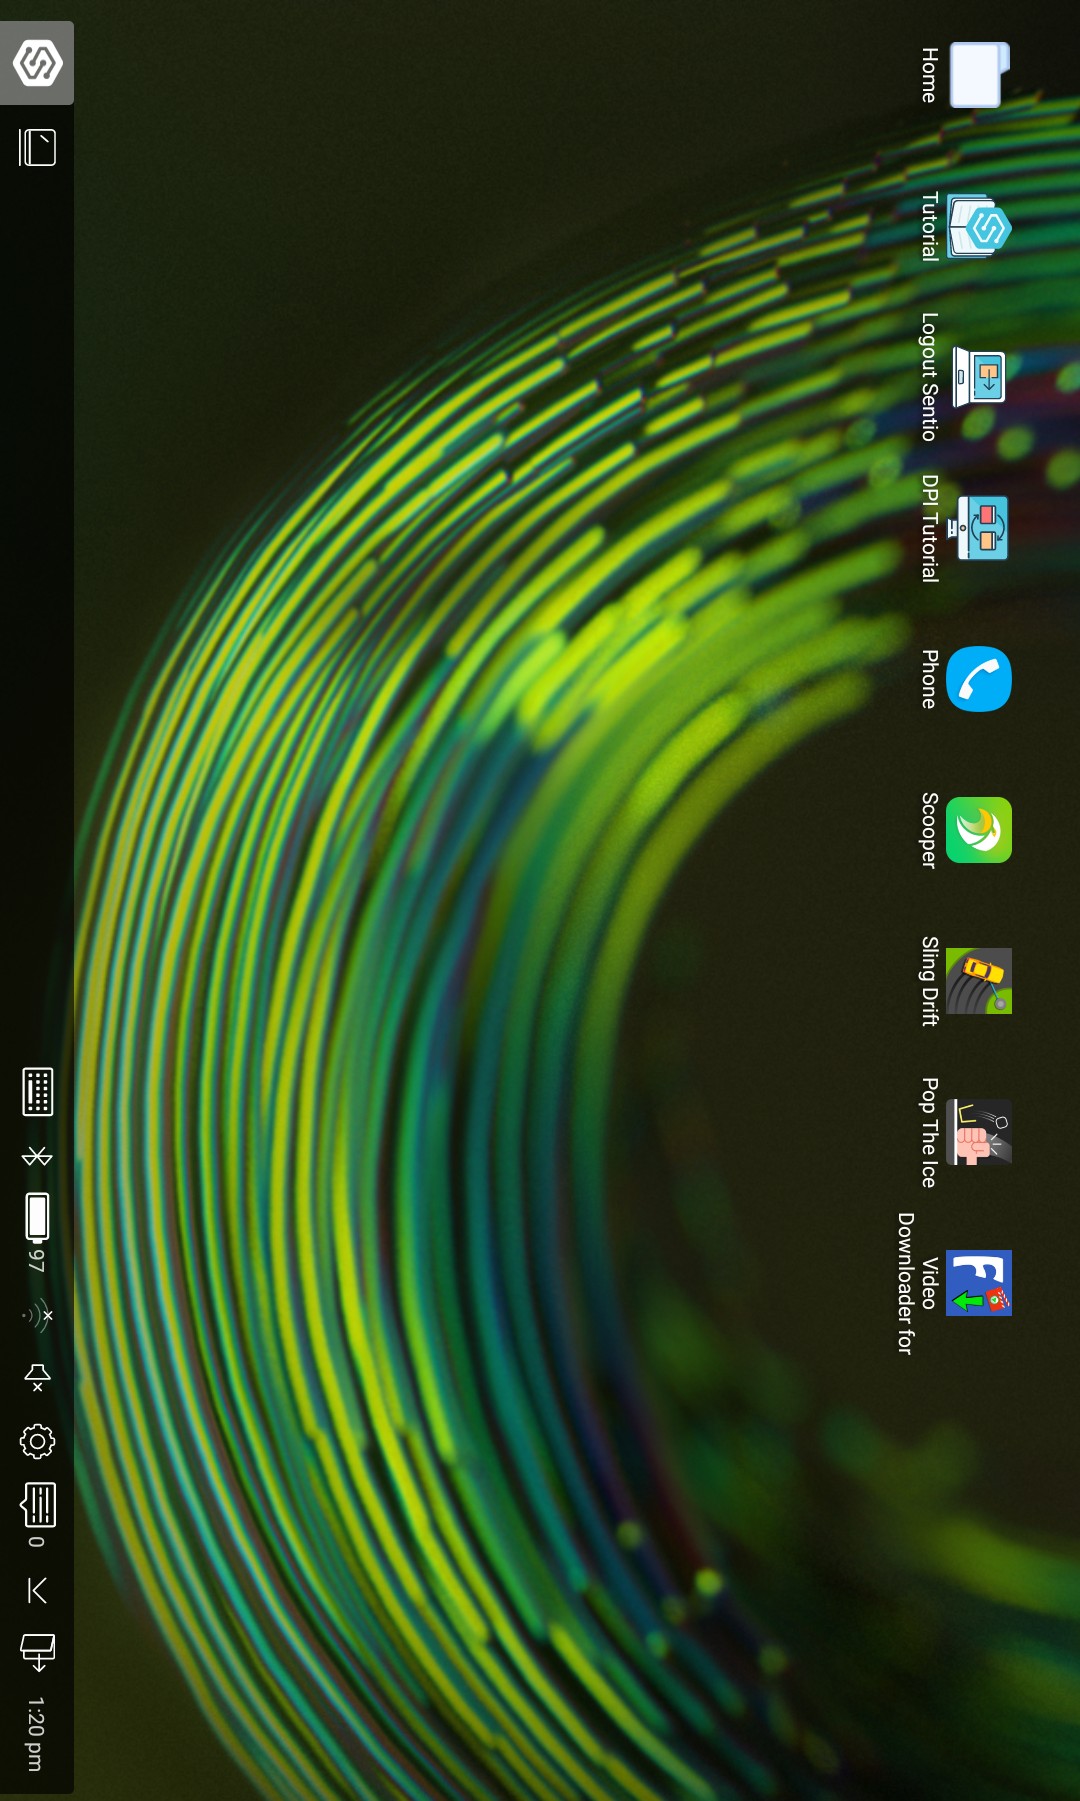 Screenshot 20191004 132055 - How to Turn Your Android Into Mac OS